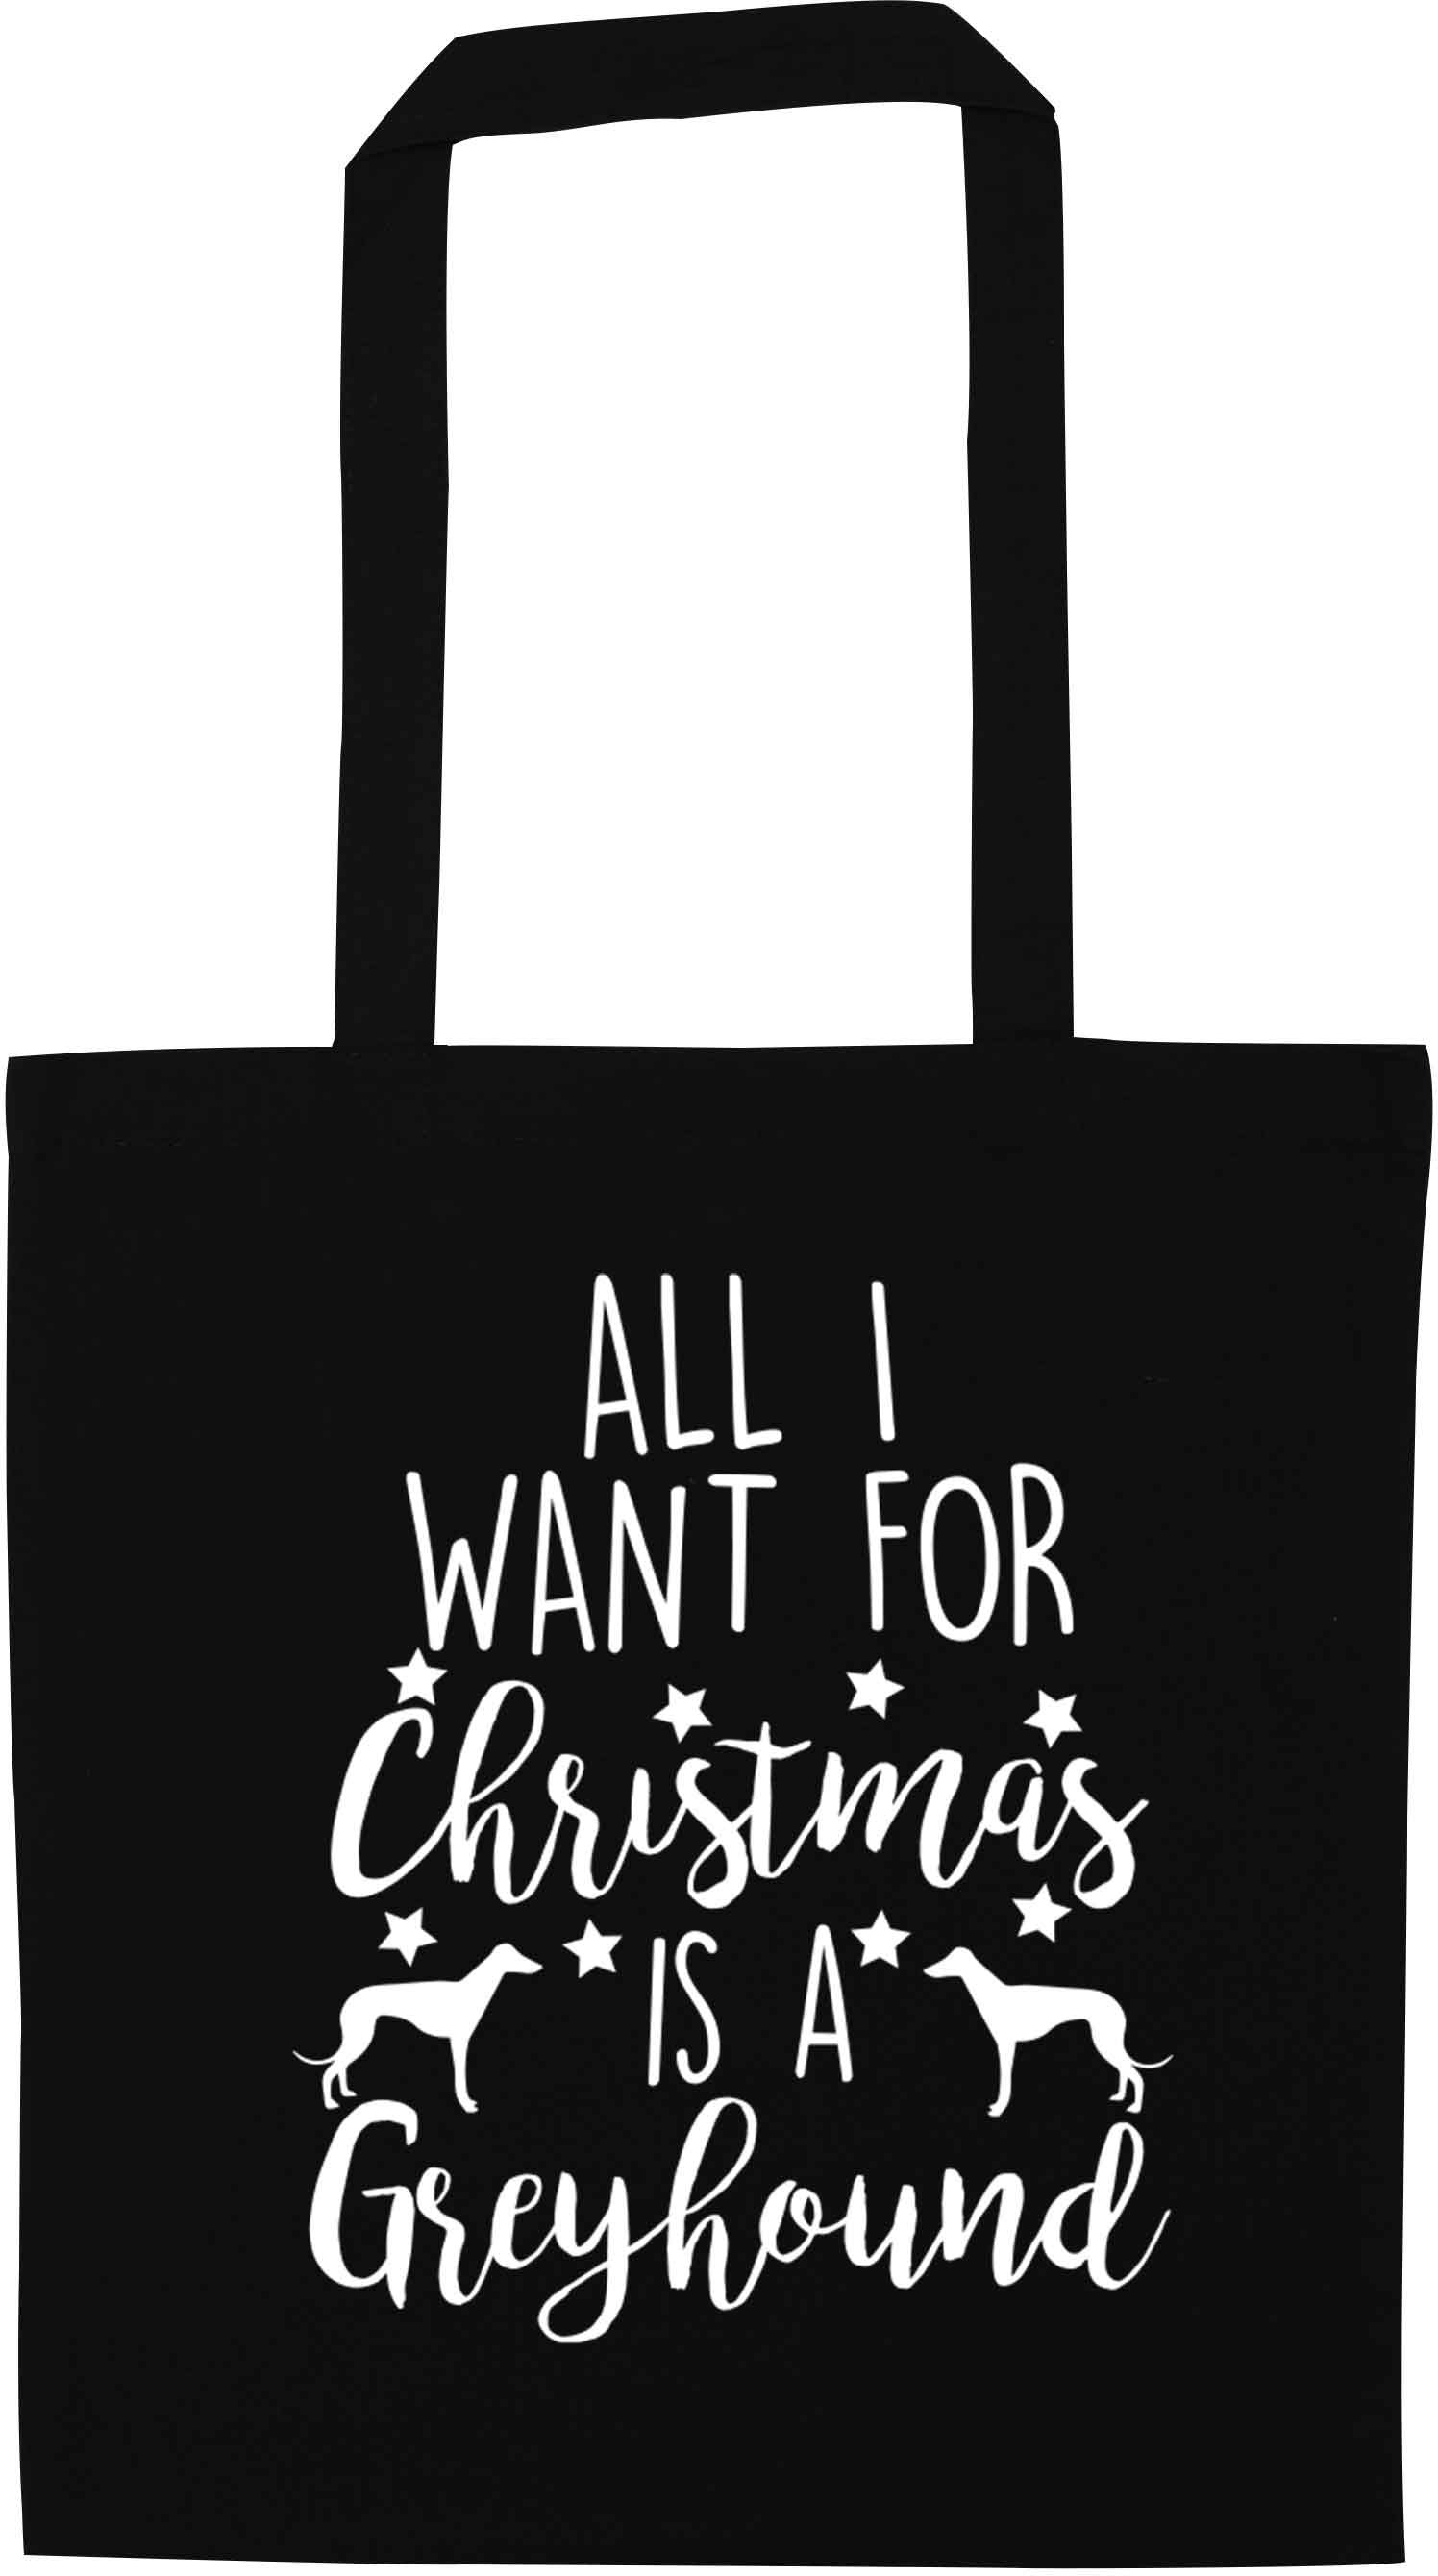 All I want for Christmas is a greyhound black tote bag